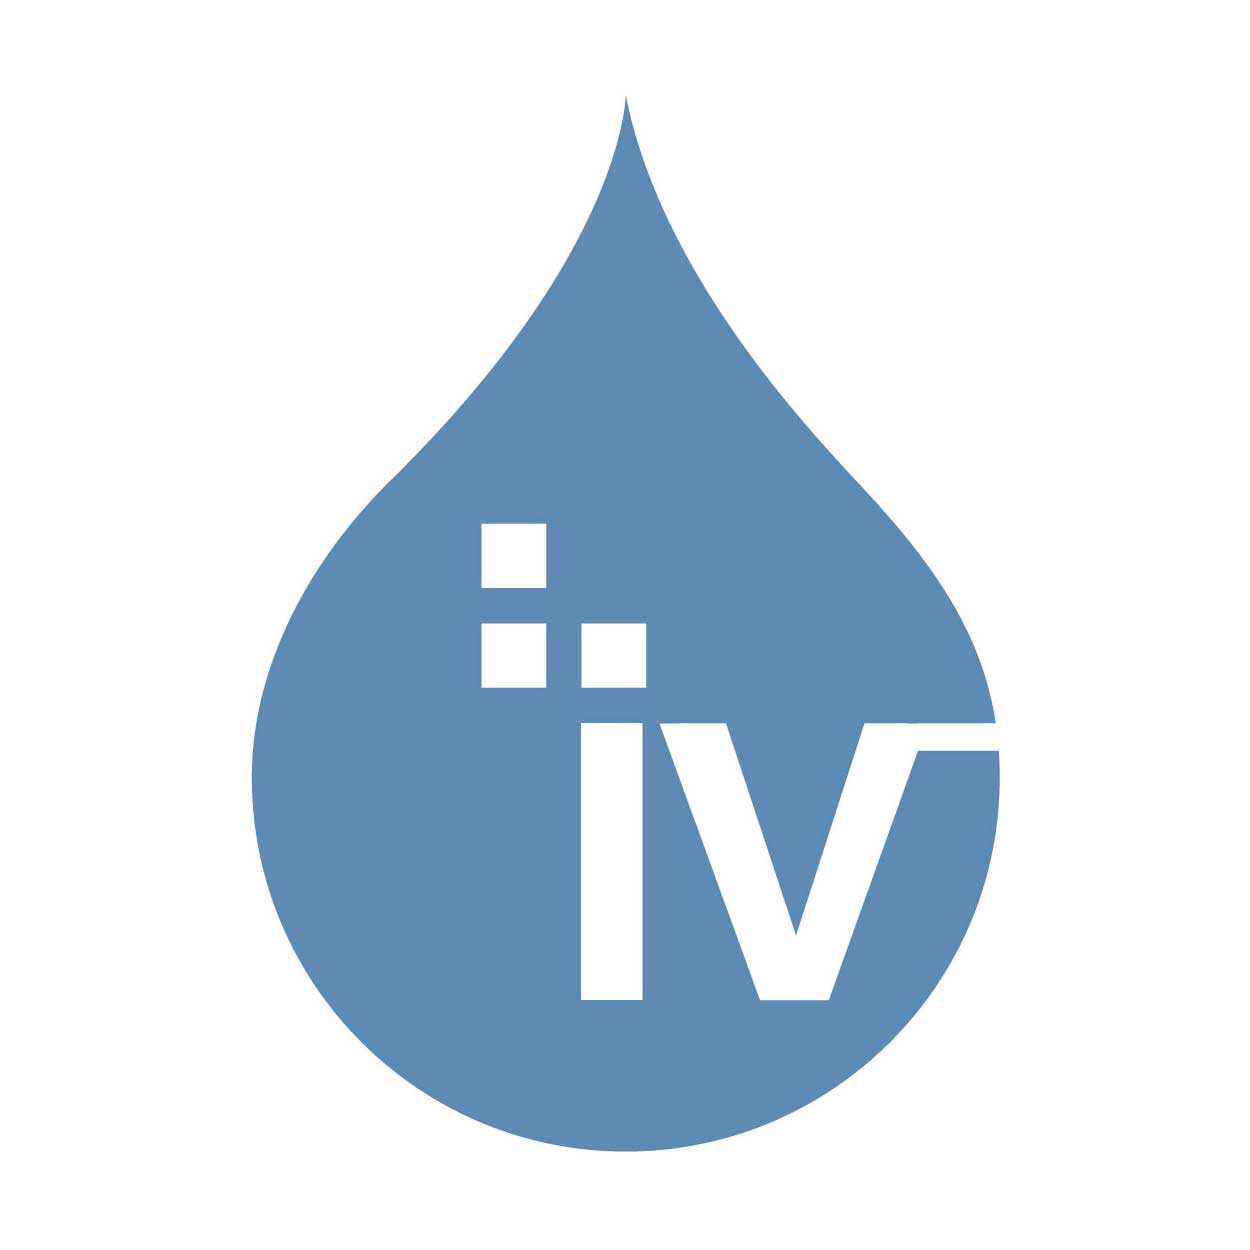 IV Logo - ivWatch. Improving Patient Safety: Early Detection of IV Infiltration